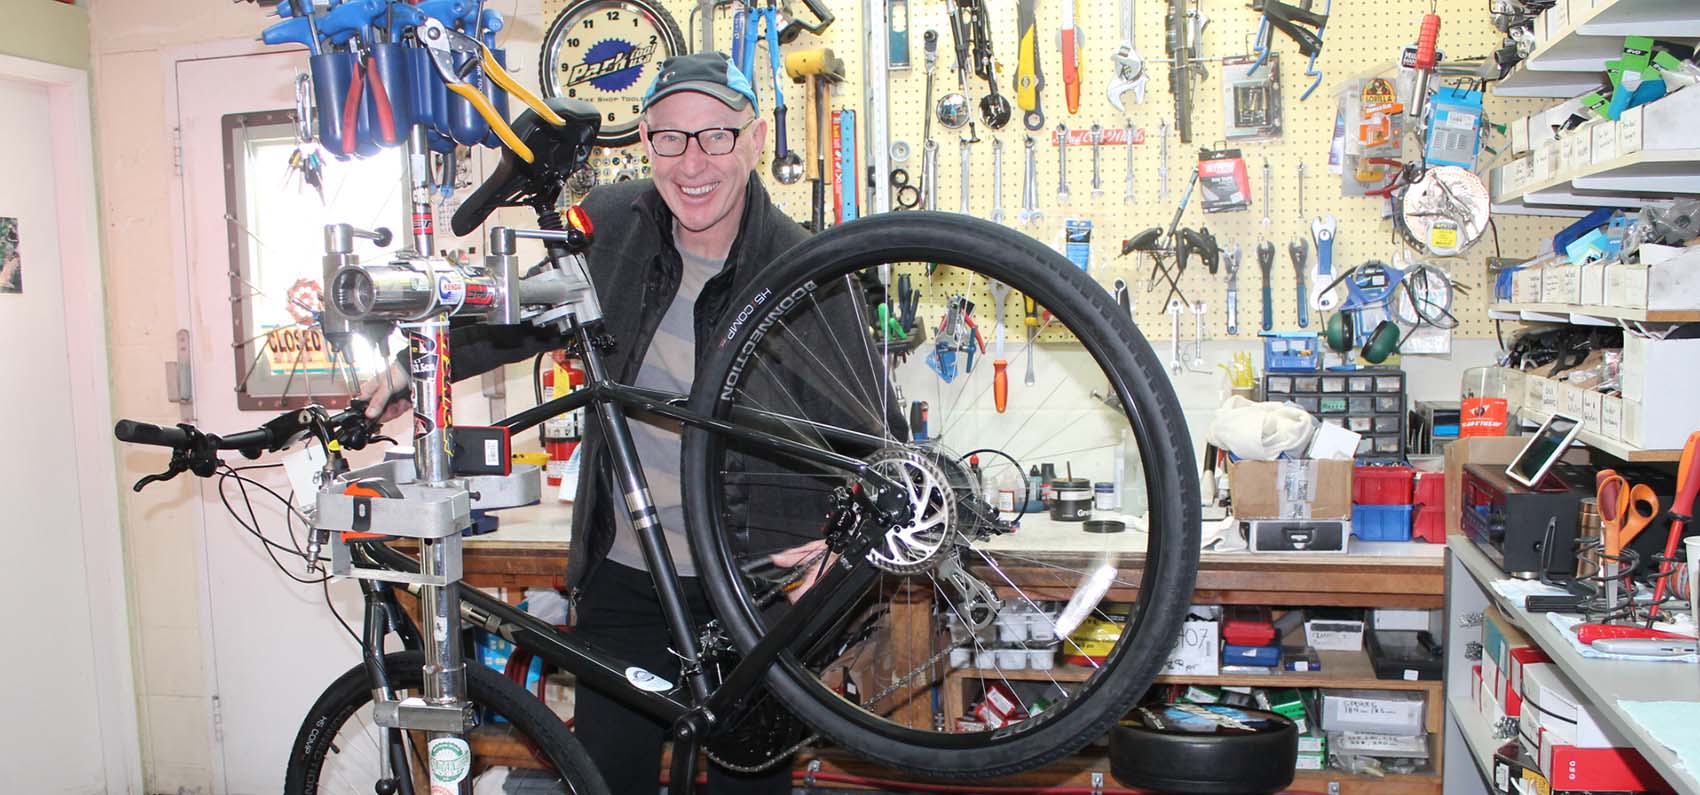 John Cope poses with a bike at Head Over Wheels Cycle & Sport